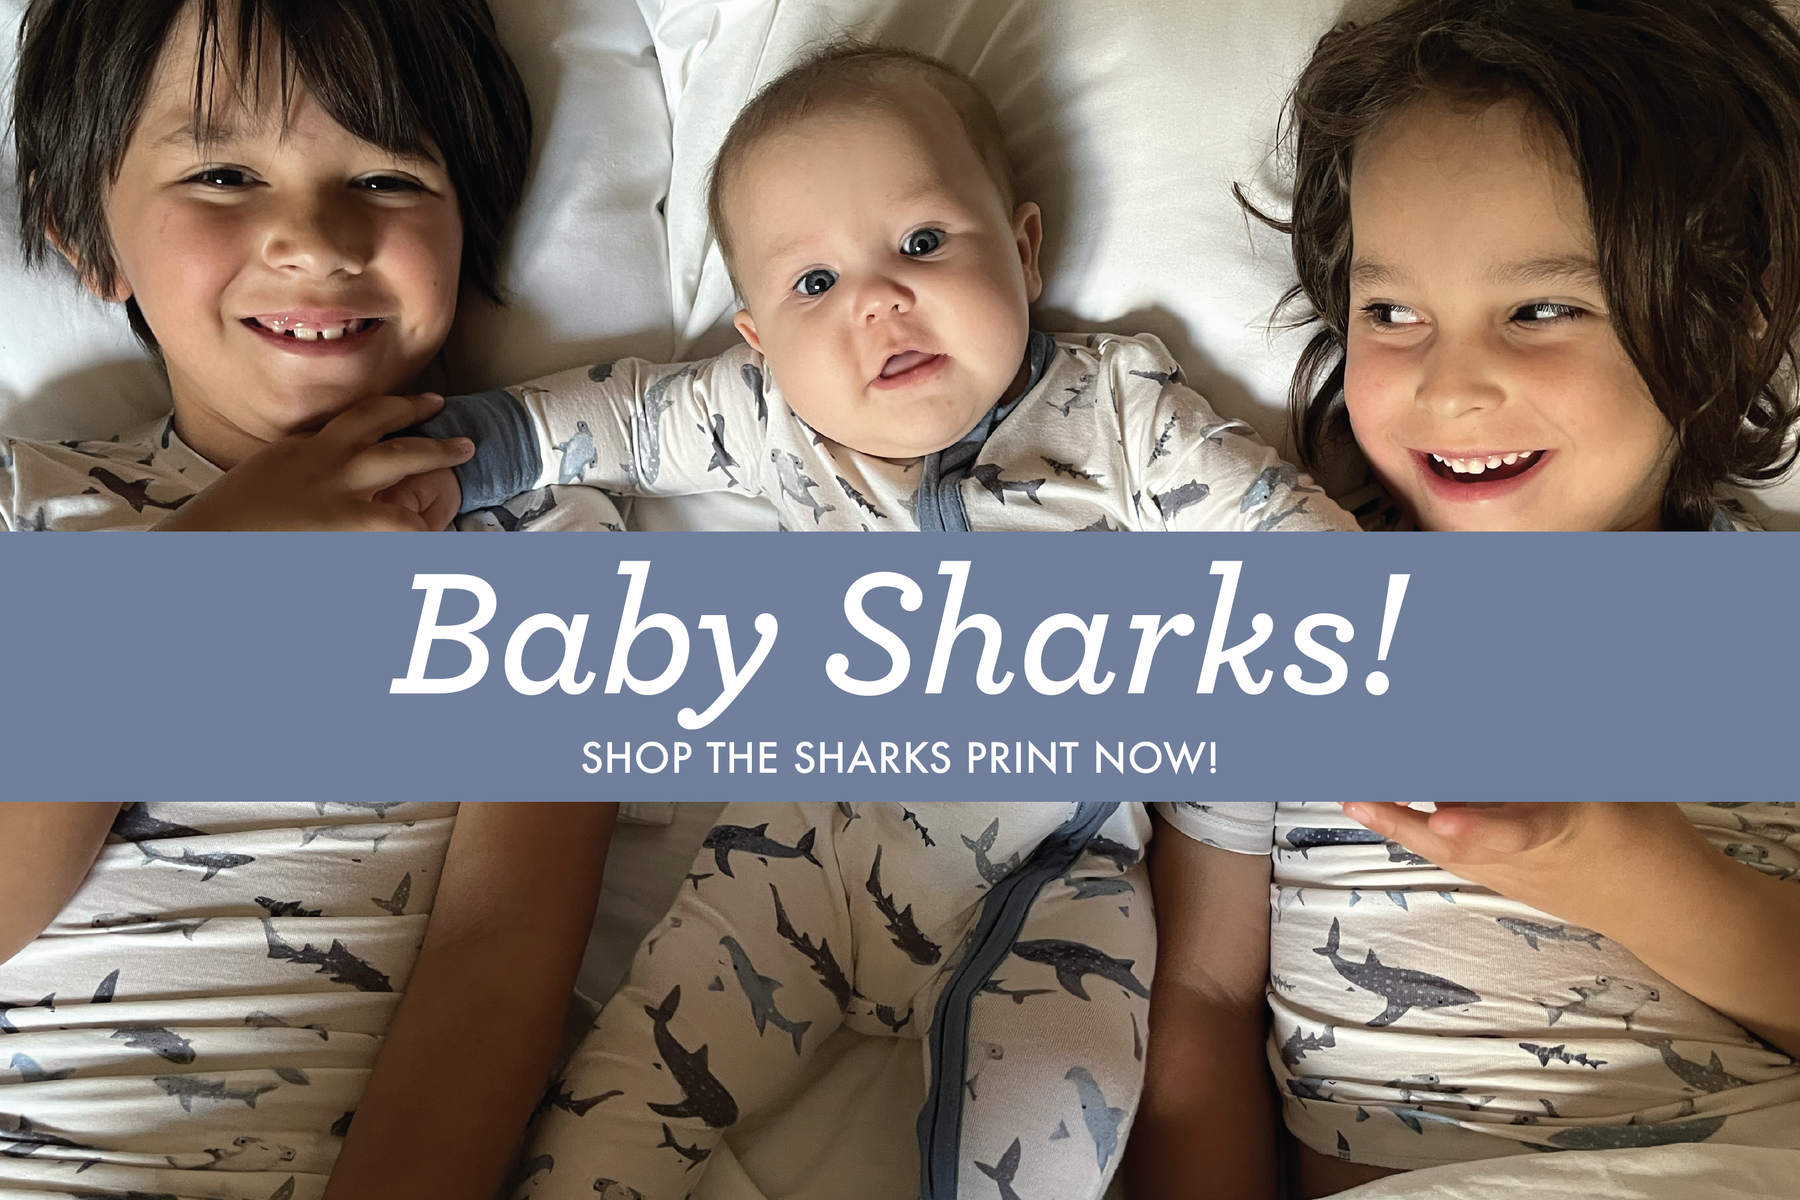 3 young boys smiling wearing baby sharks print